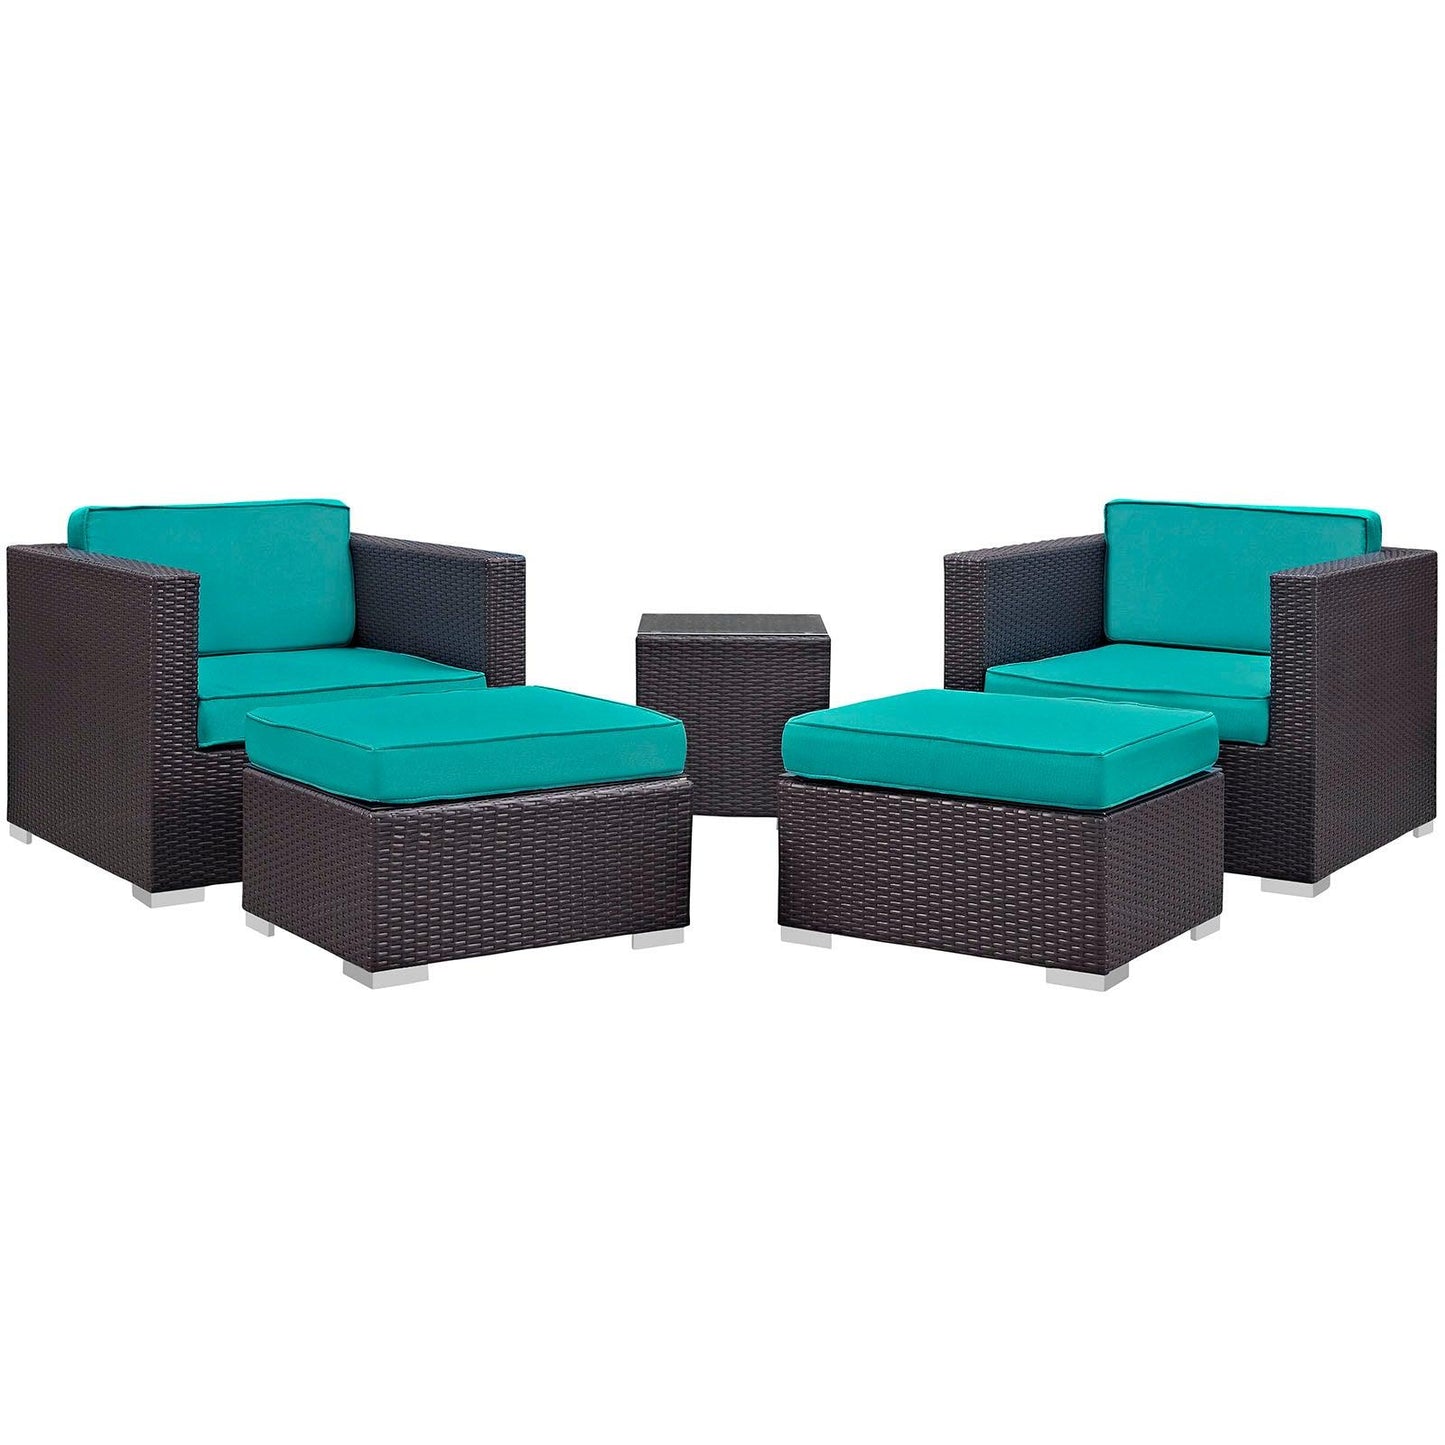 Modway Convene 5 Piece Outdoor Patio Sectional Set FredCo